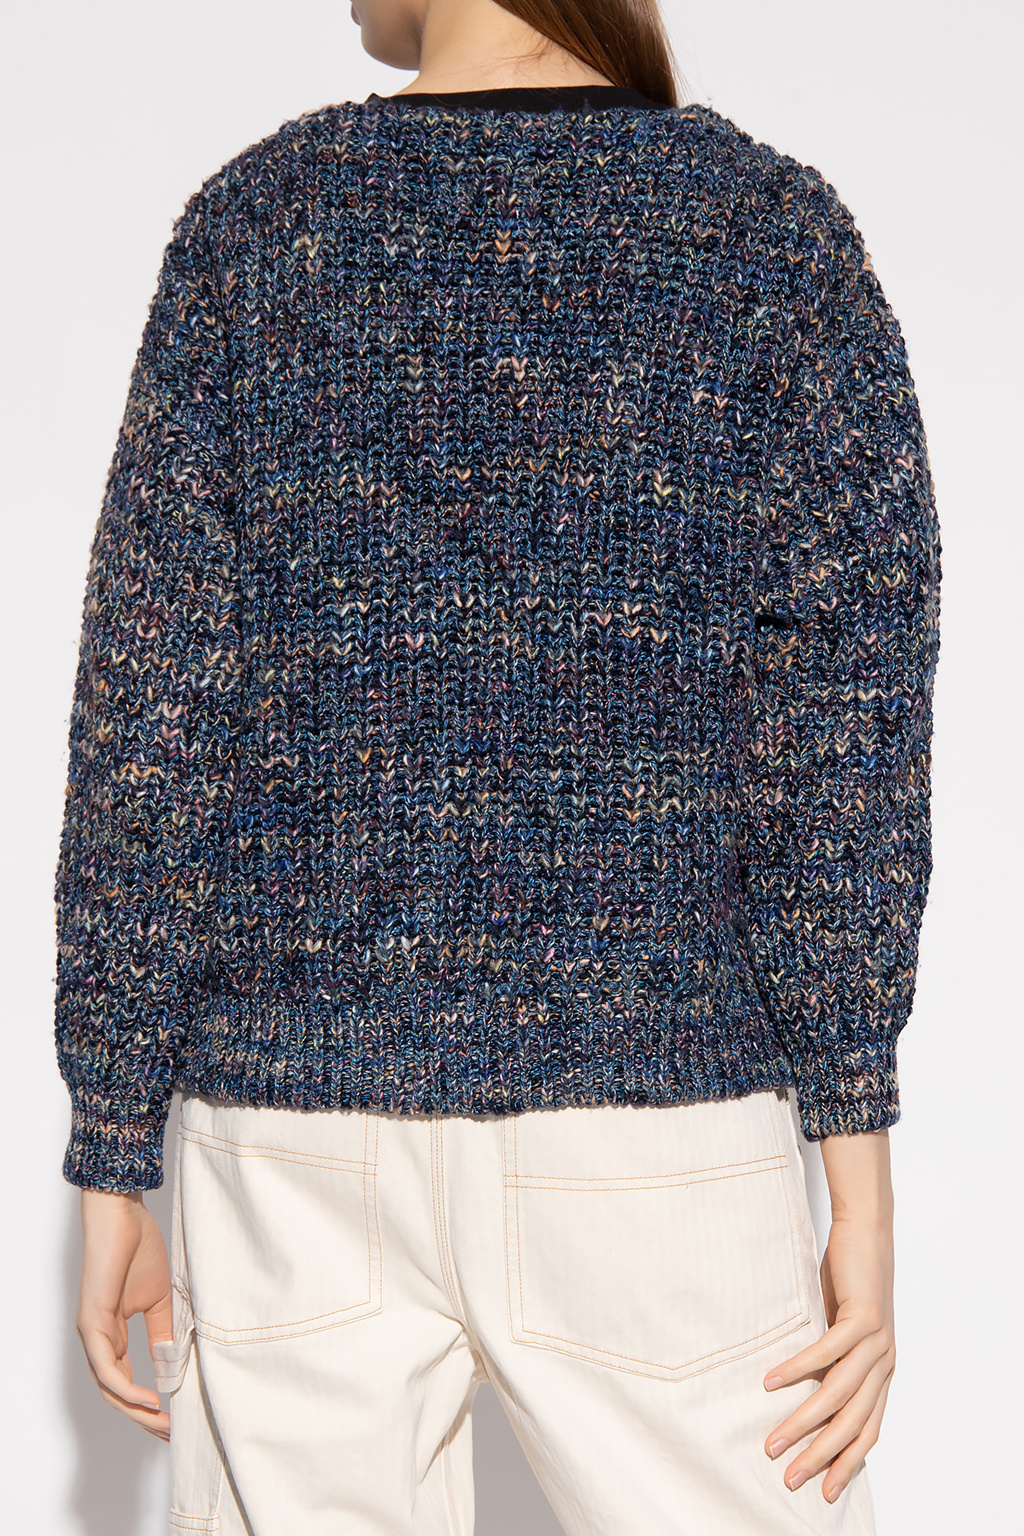 Fashion Sweaters Knitted Sweaters Laurèl Laur\u00e8l Knitted Sweater blue-black mixed pattern glittery 